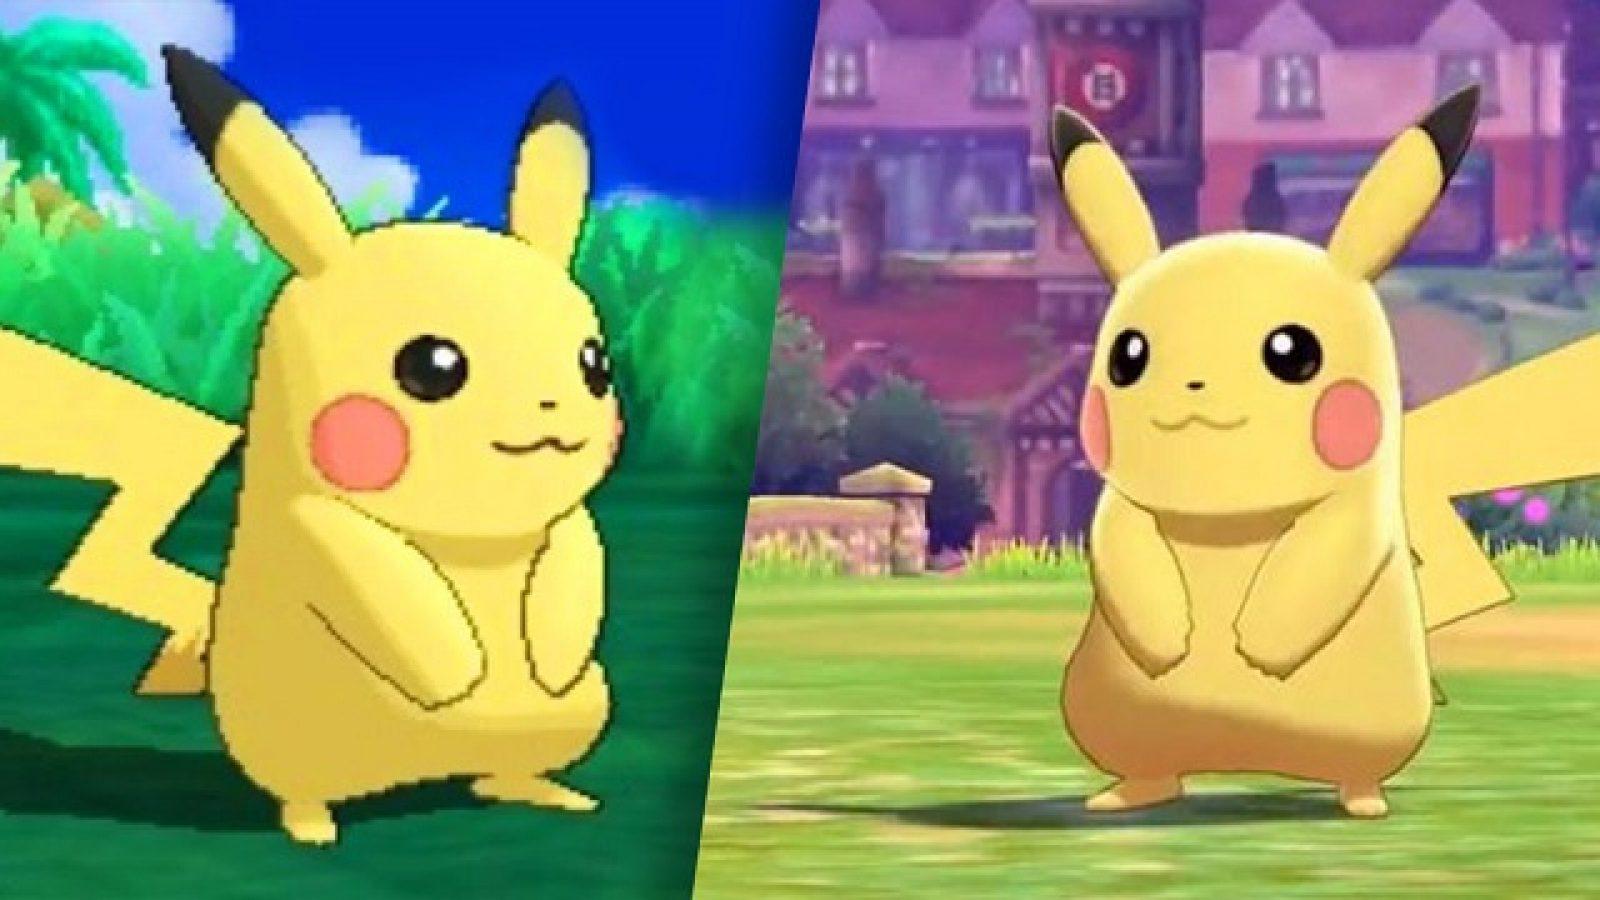 Pokémon Sword and Shield Gameplay Shown Off At E3